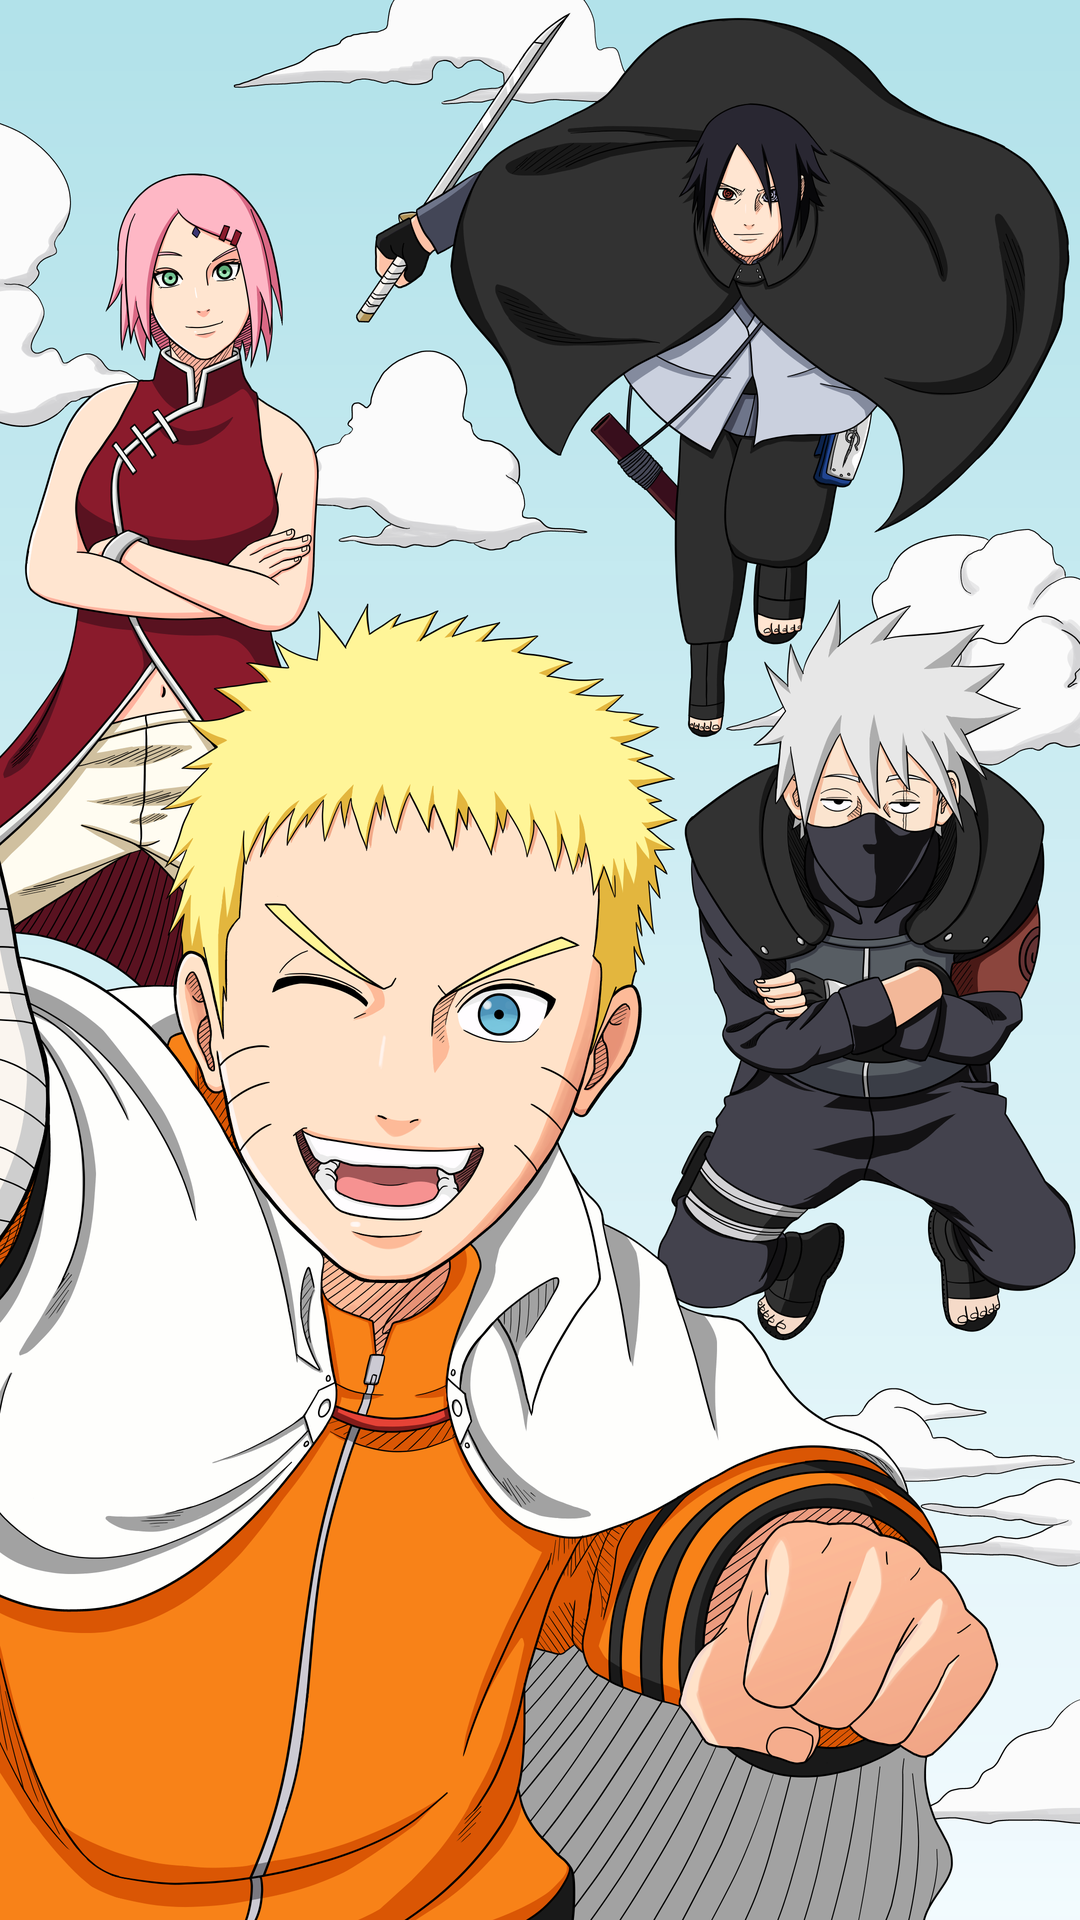 Team 7 Wallpapers